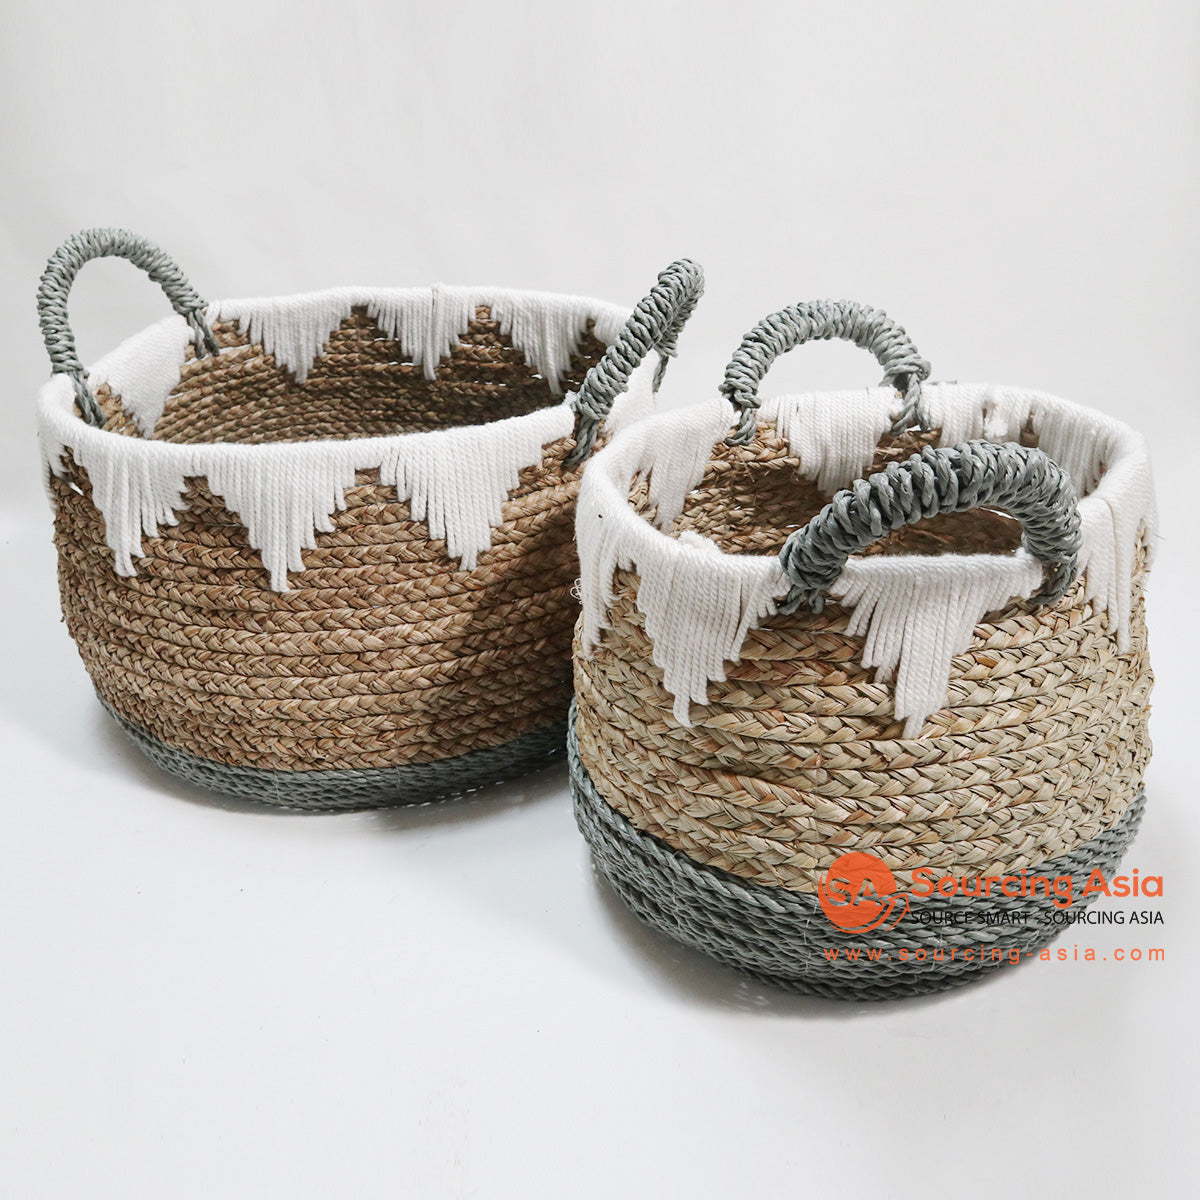 HBSC074 SET OF TWO GREY AND NATURAL MENDONG AND MACRAME BASKETS